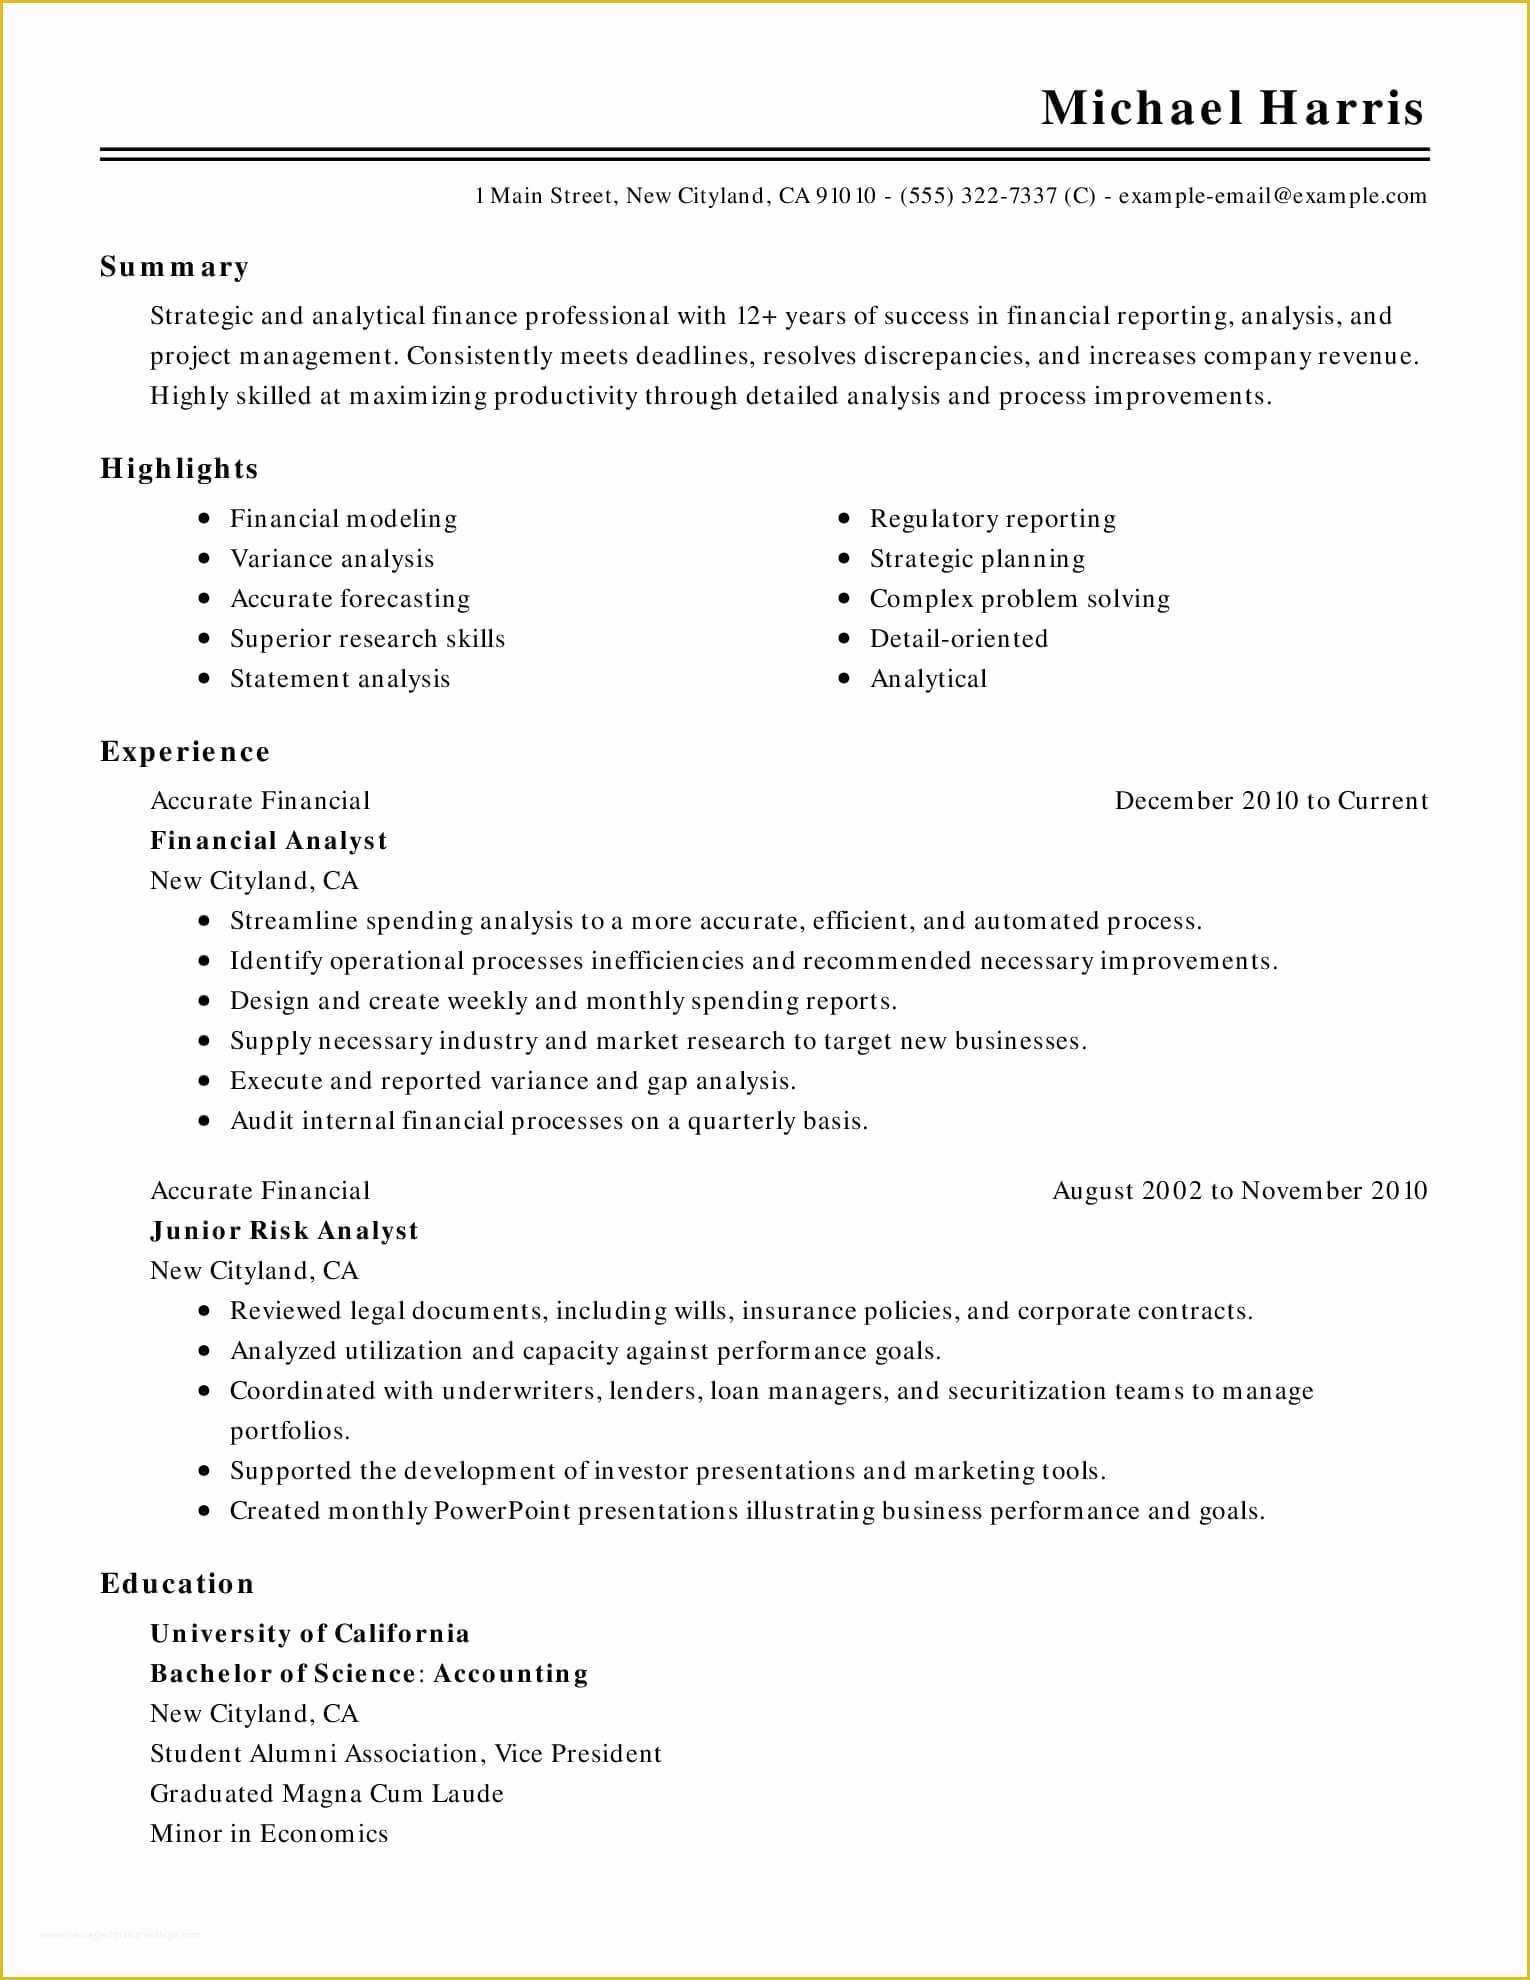 Microsoft Word Free Templates for Resumes Of 15 Of the Best Resume Templates for Microsoft Word Fice